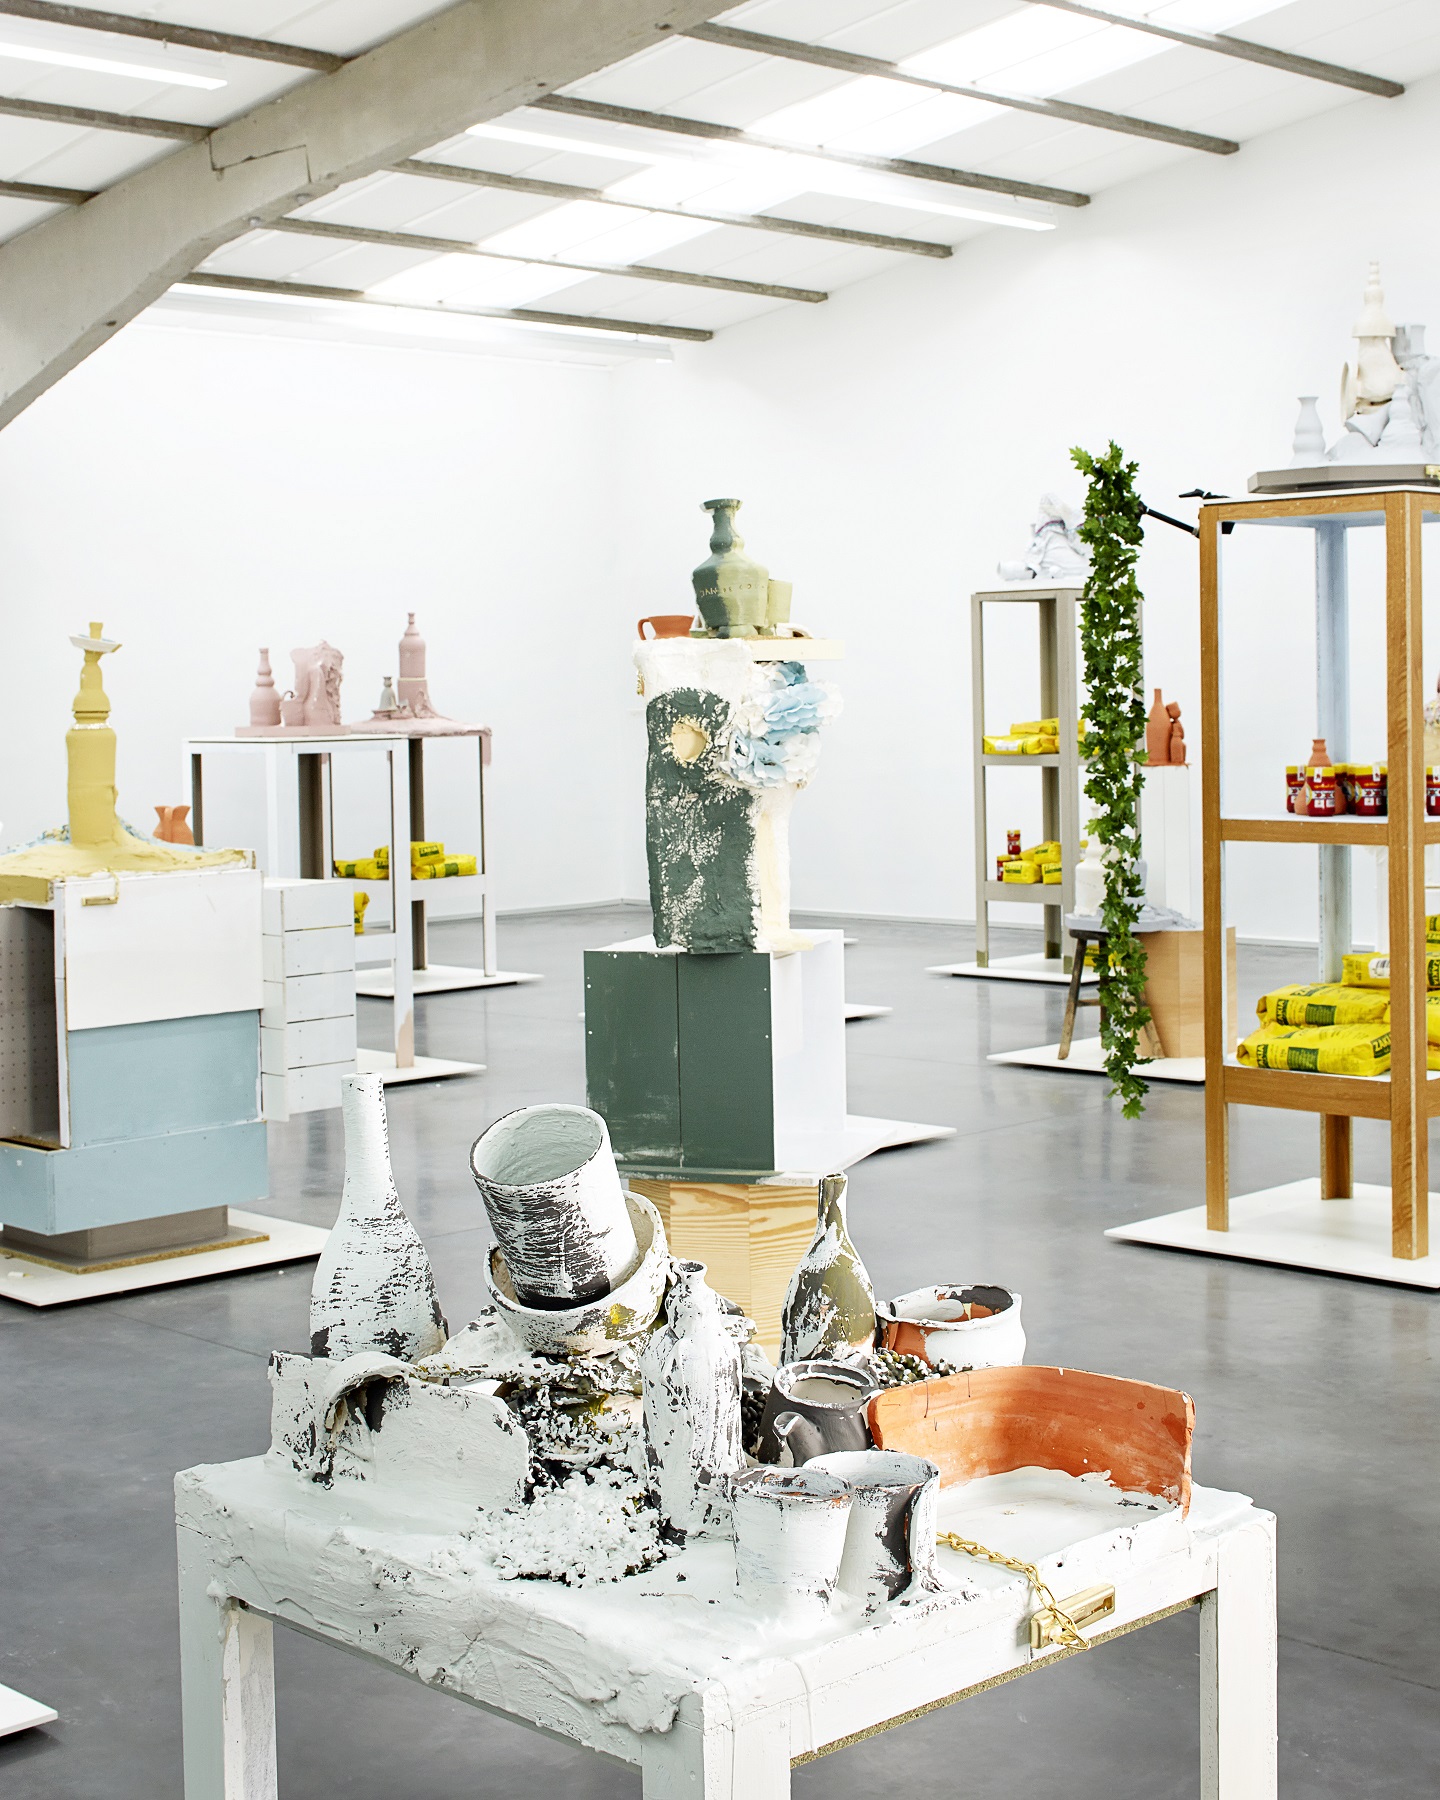 Jan De Cock, Everything For You , Otegem, 2013 - exhibition view